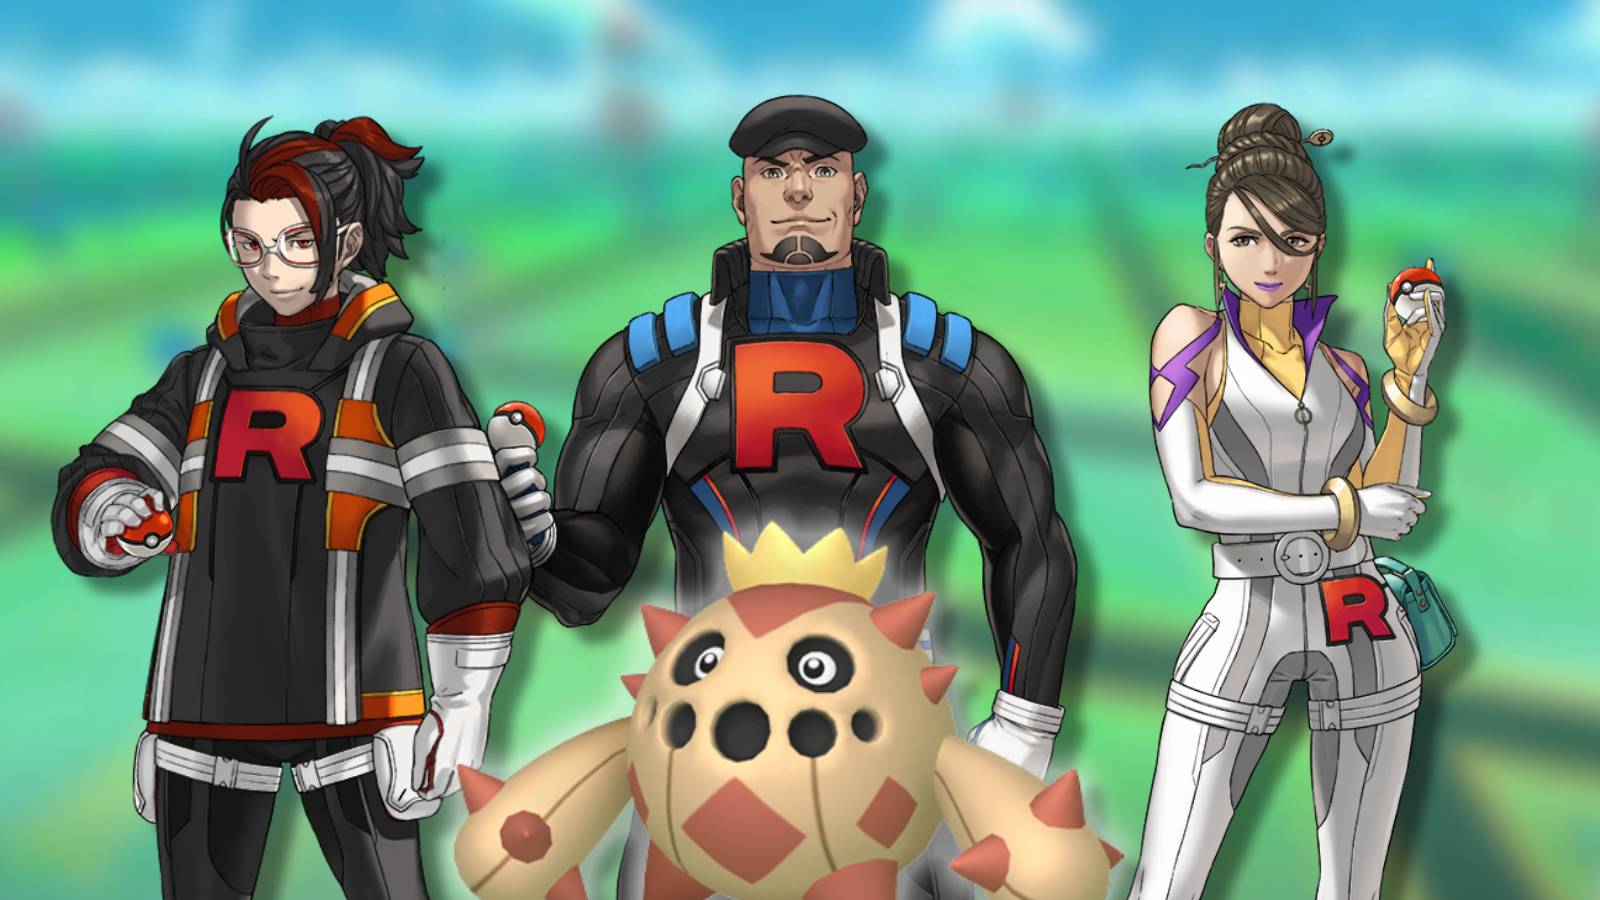 The Pokemon Go Team Rocket bosses appear against a blurred backgroun, with a Shiny Cacnea - the cactus Pokemon - in the foreground